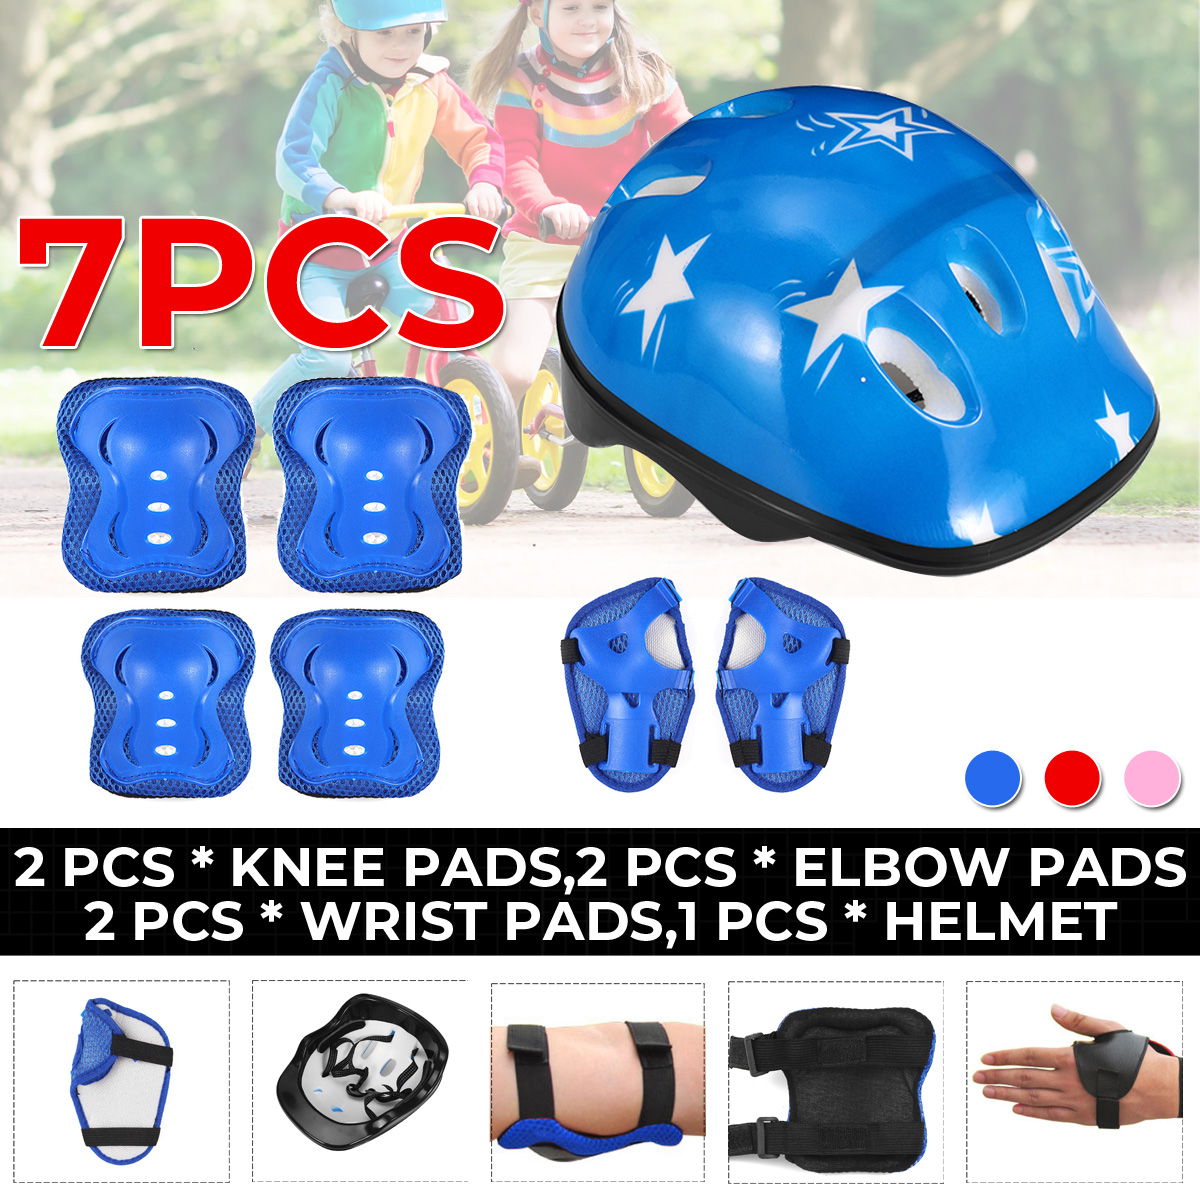 7Pcs-Elbow-Knee-Wrist-Protective-Guard-Elbow-Pads-Safety-Gear-Pad-Wrist-Guard-Skateboard-Protective--1781562-1